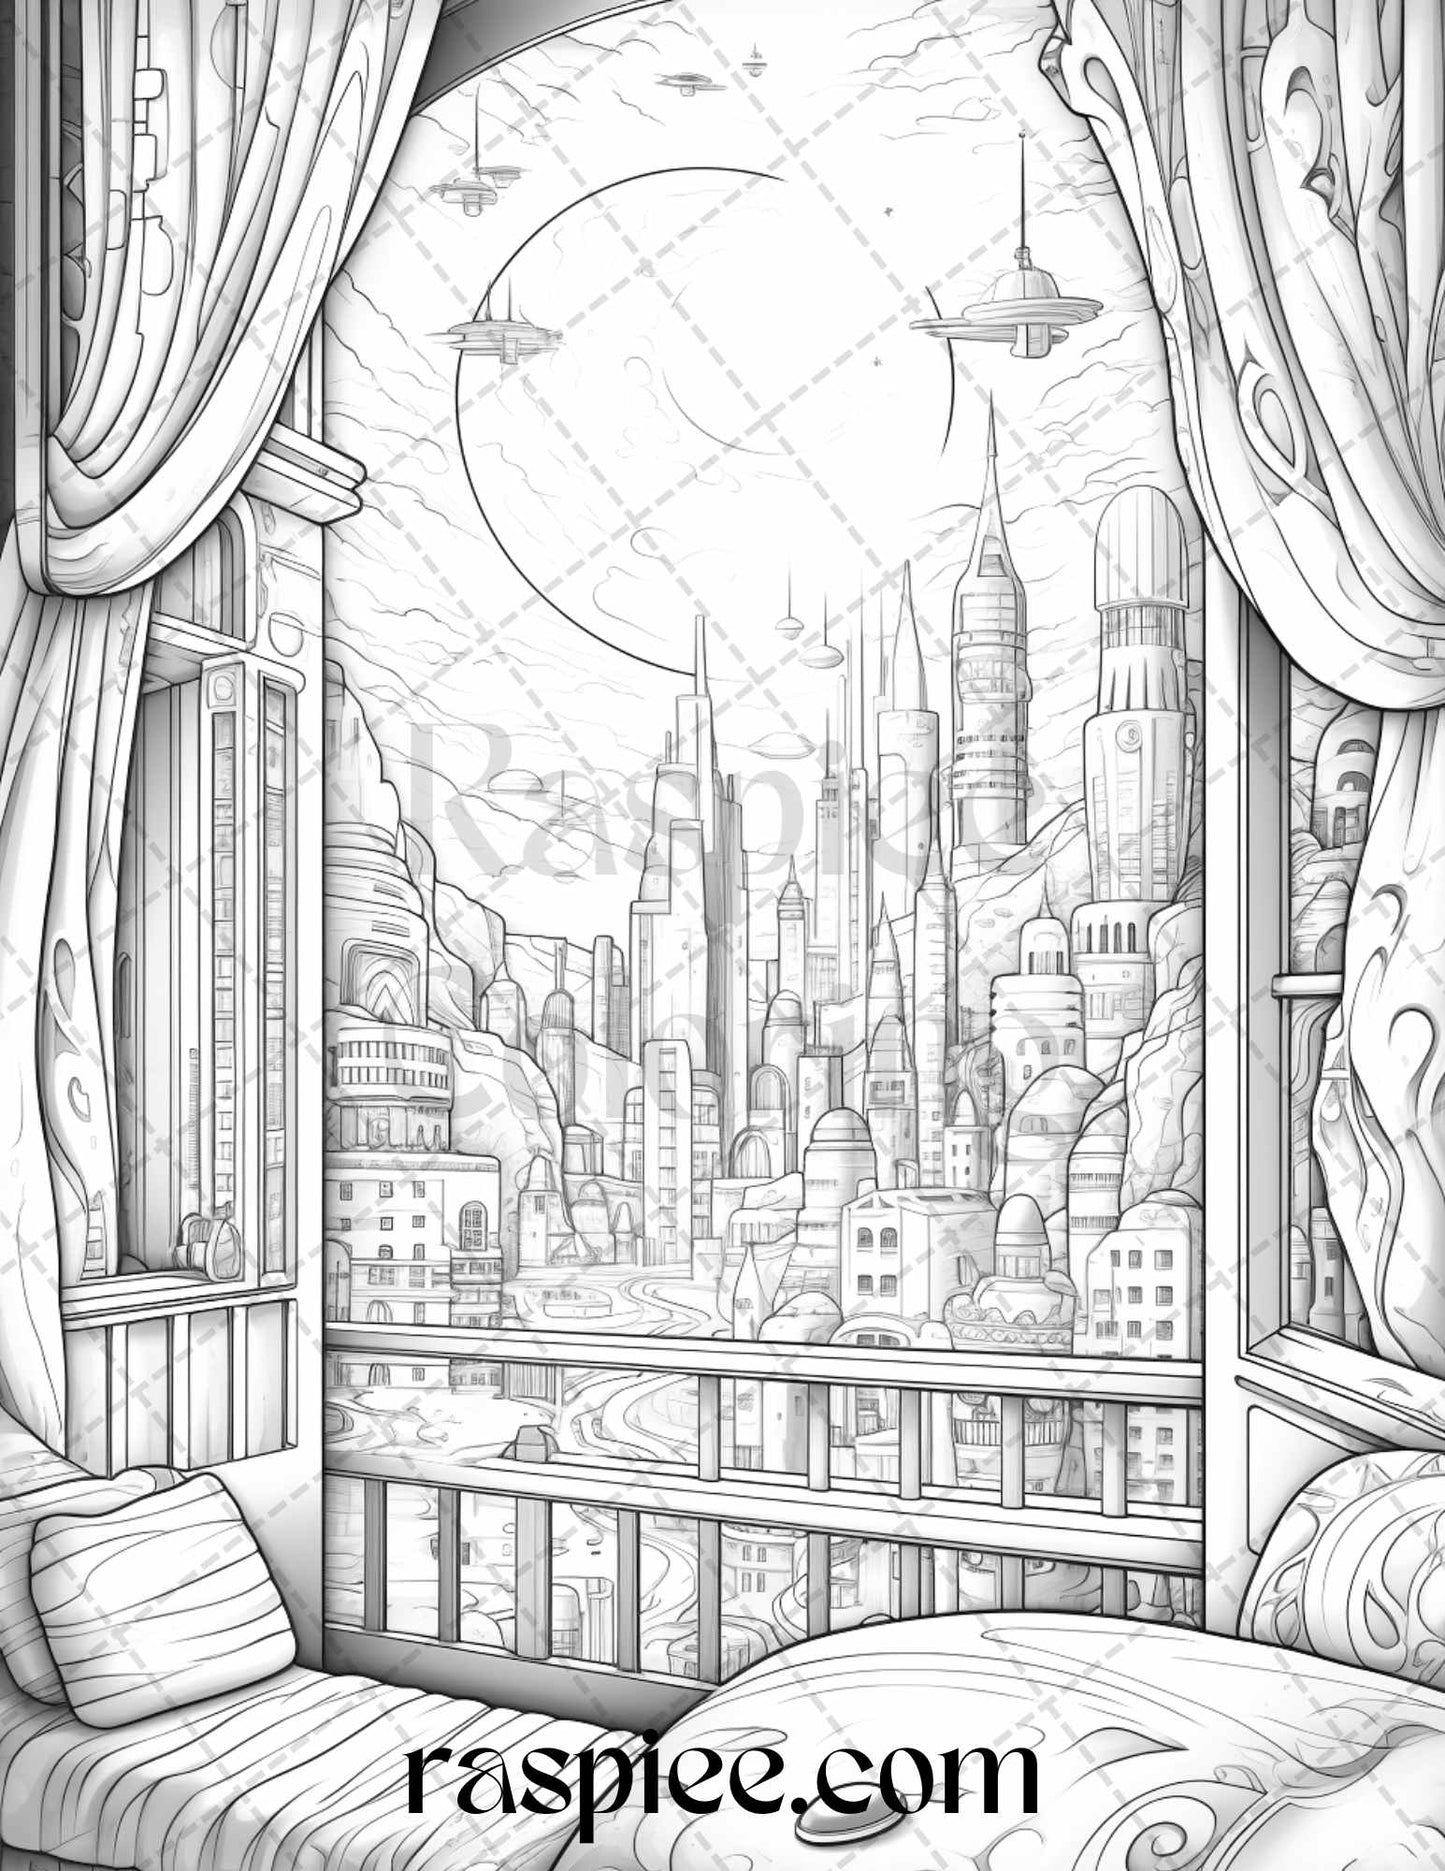 grayscale coloring pages, fantasy coloring pages, adult coloring pages, printable coloring pages, grayscale art, coloring book, fantasy art, magical illustrations, mystical creatures, intricate designs, detailed artwork, stress relief, imaginative landscapes, fairy tale coloring, whimsical drawings, enchanting scenes